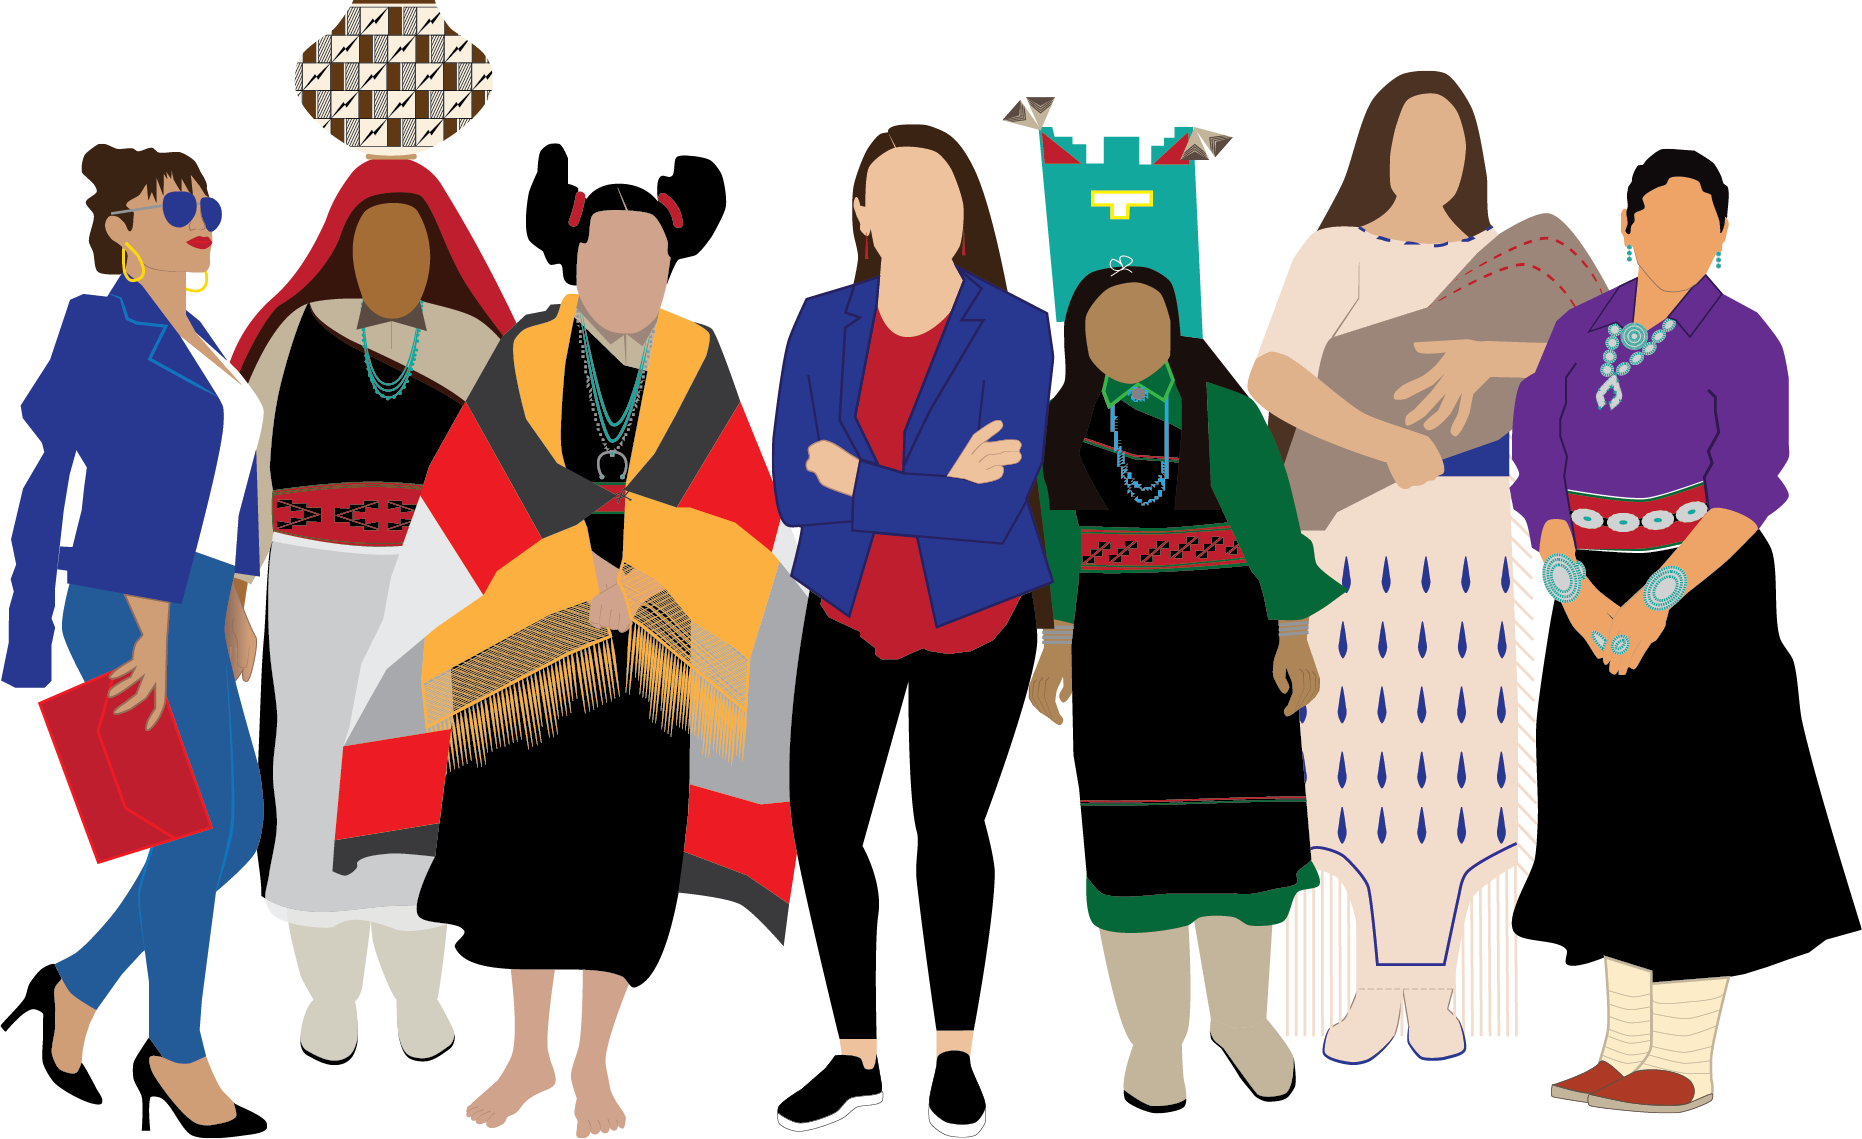 Illustration of a diverse group of indigenous women